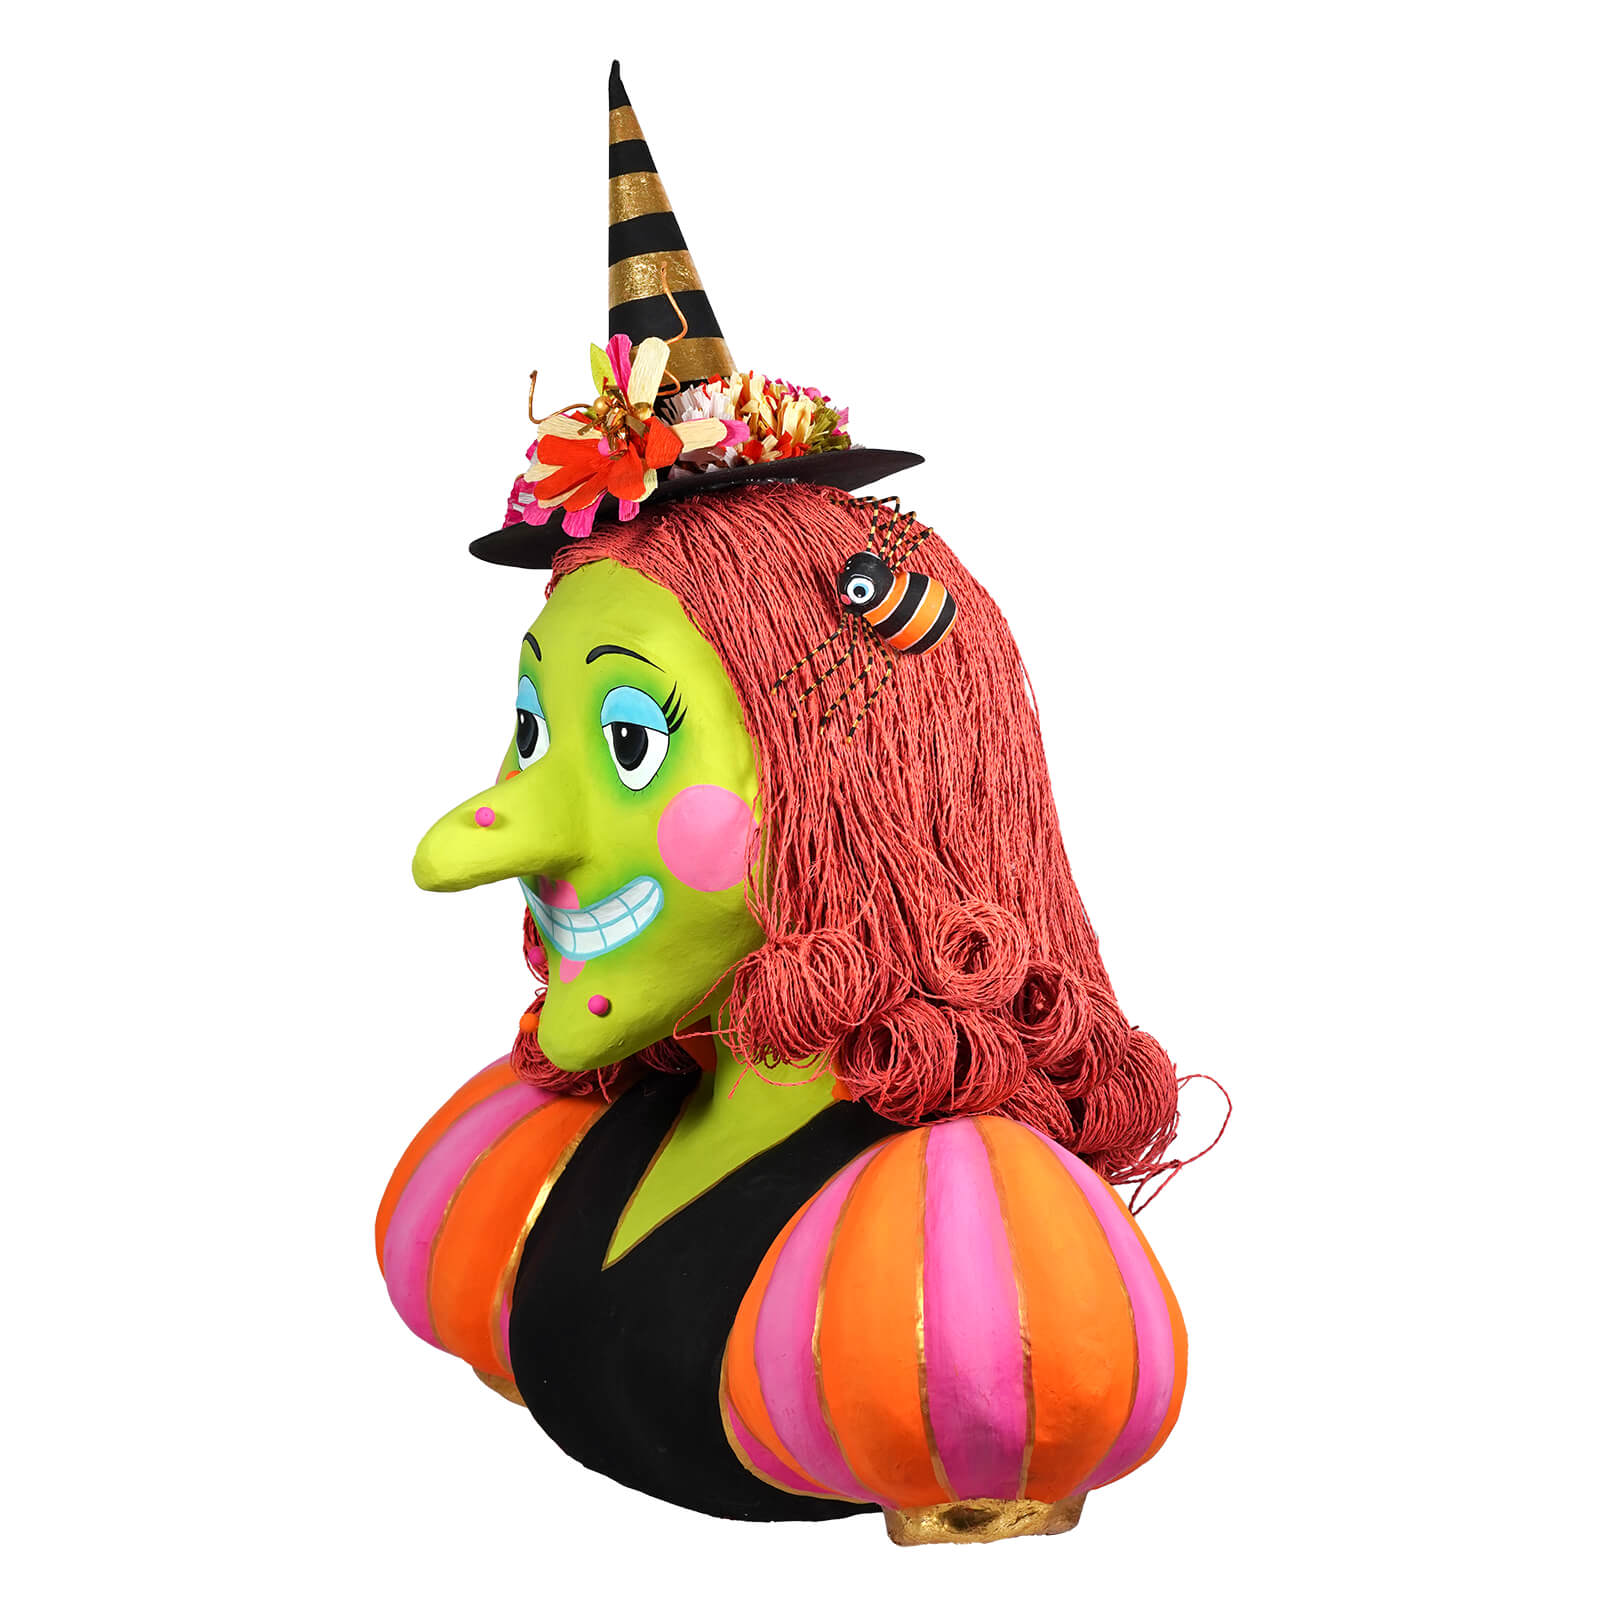 Itchy Witchy Bust Display